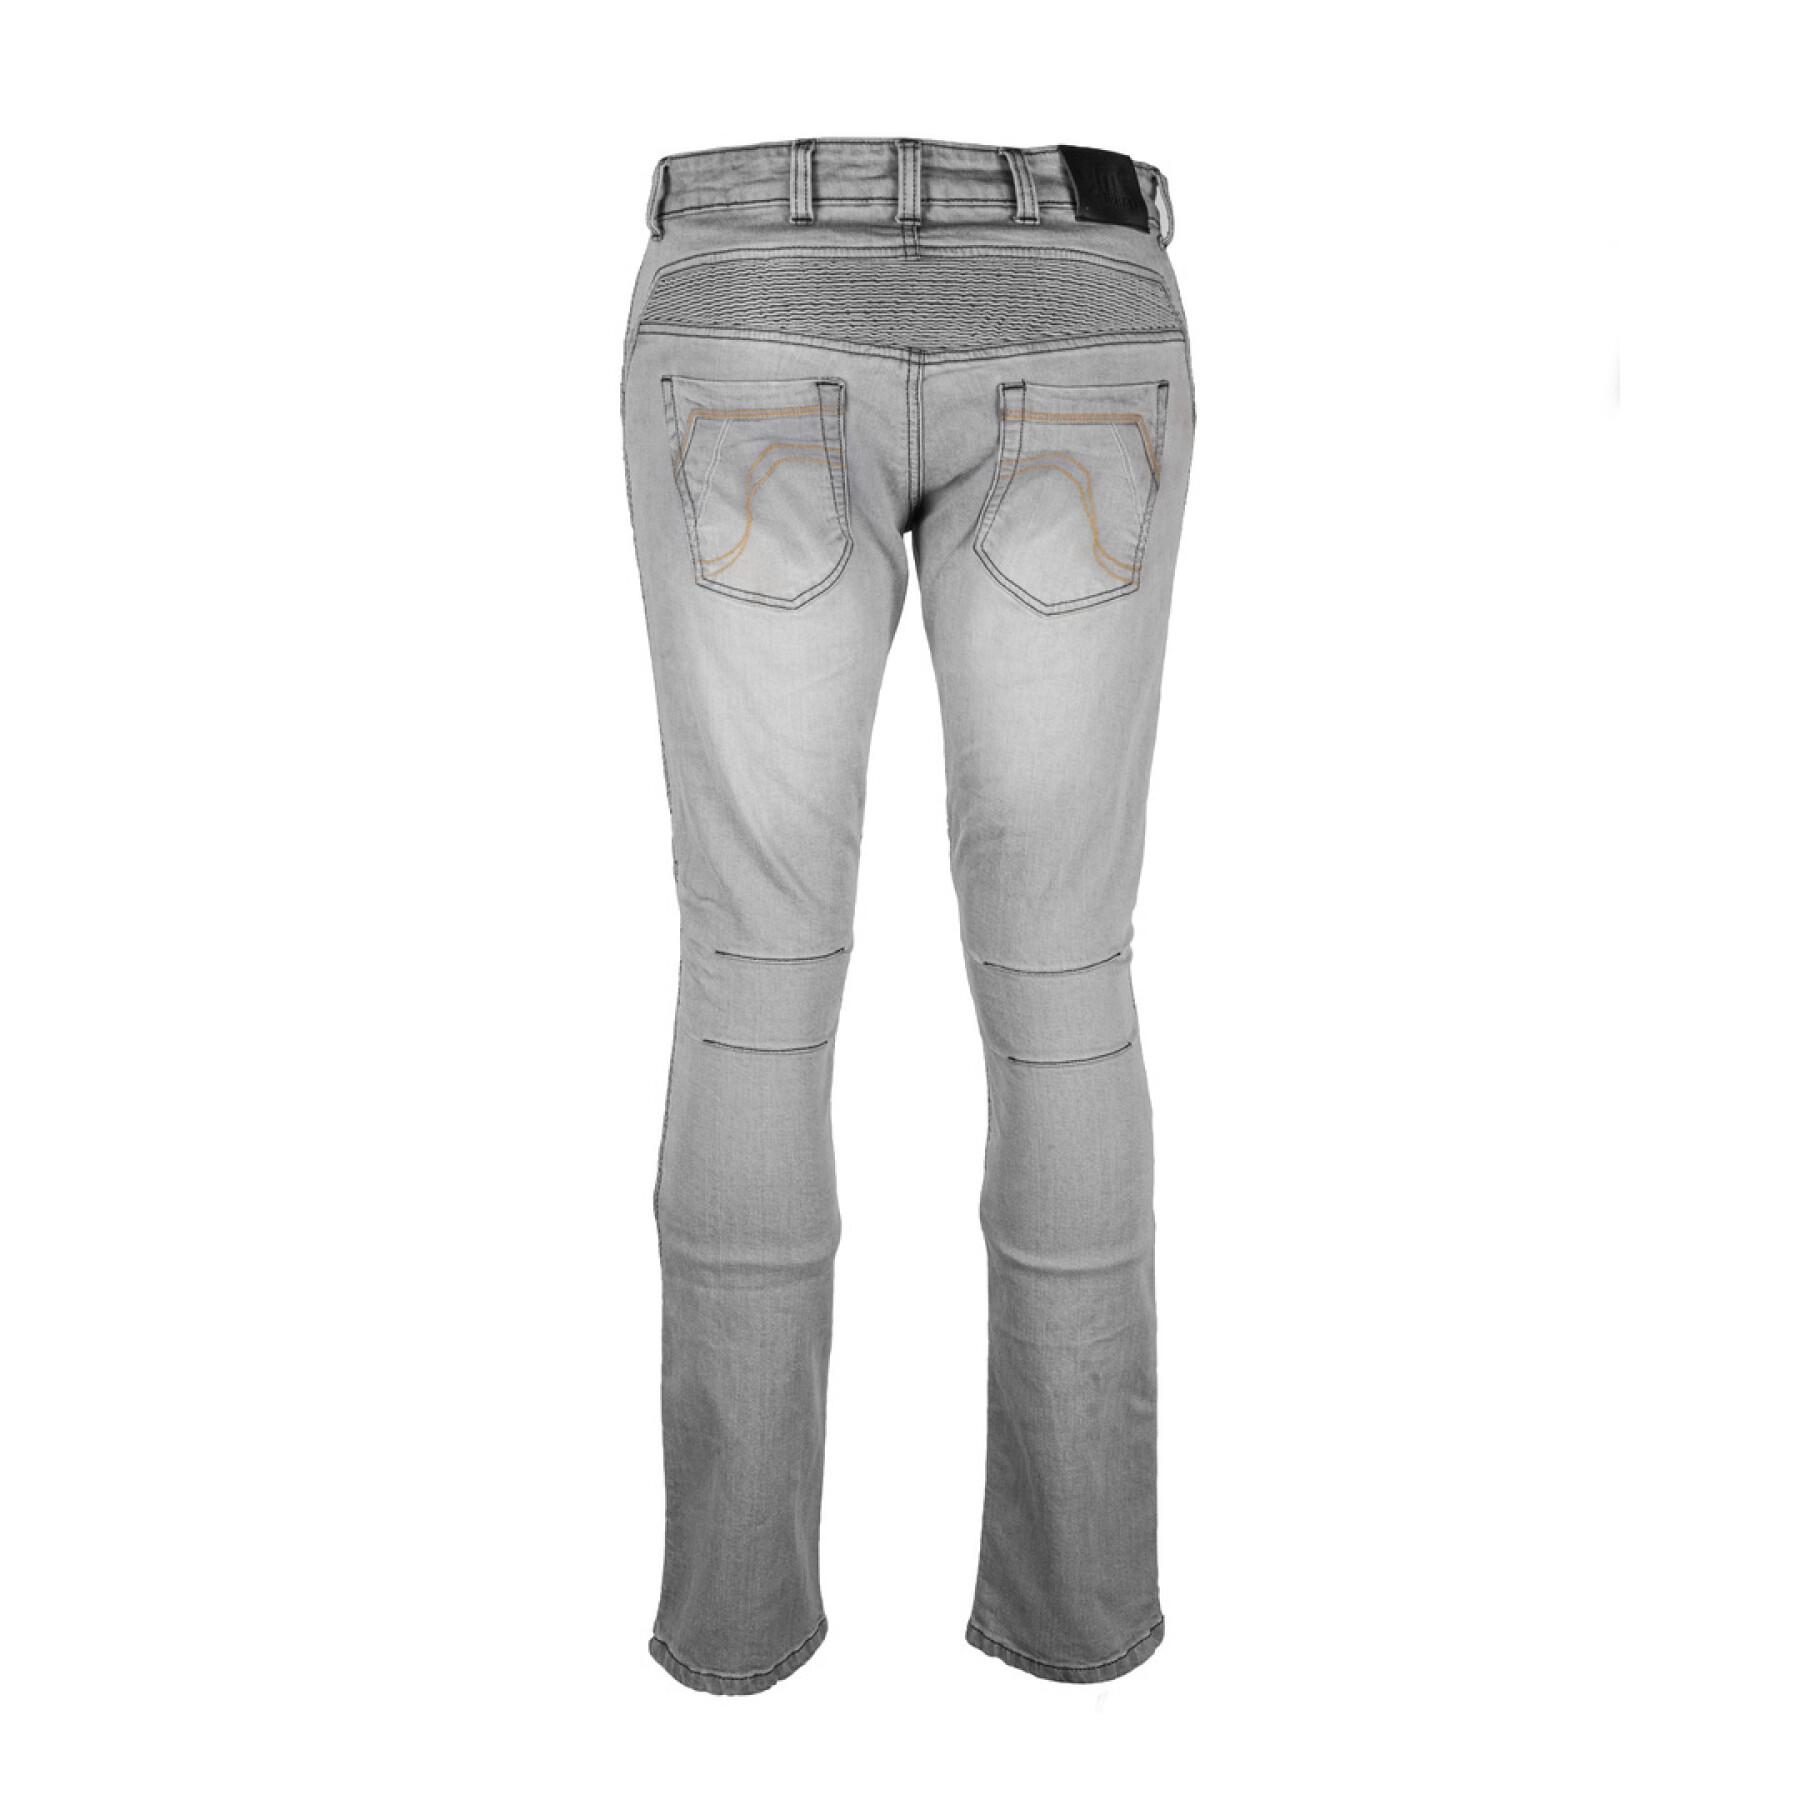 Motorcycle jeans GMS viper